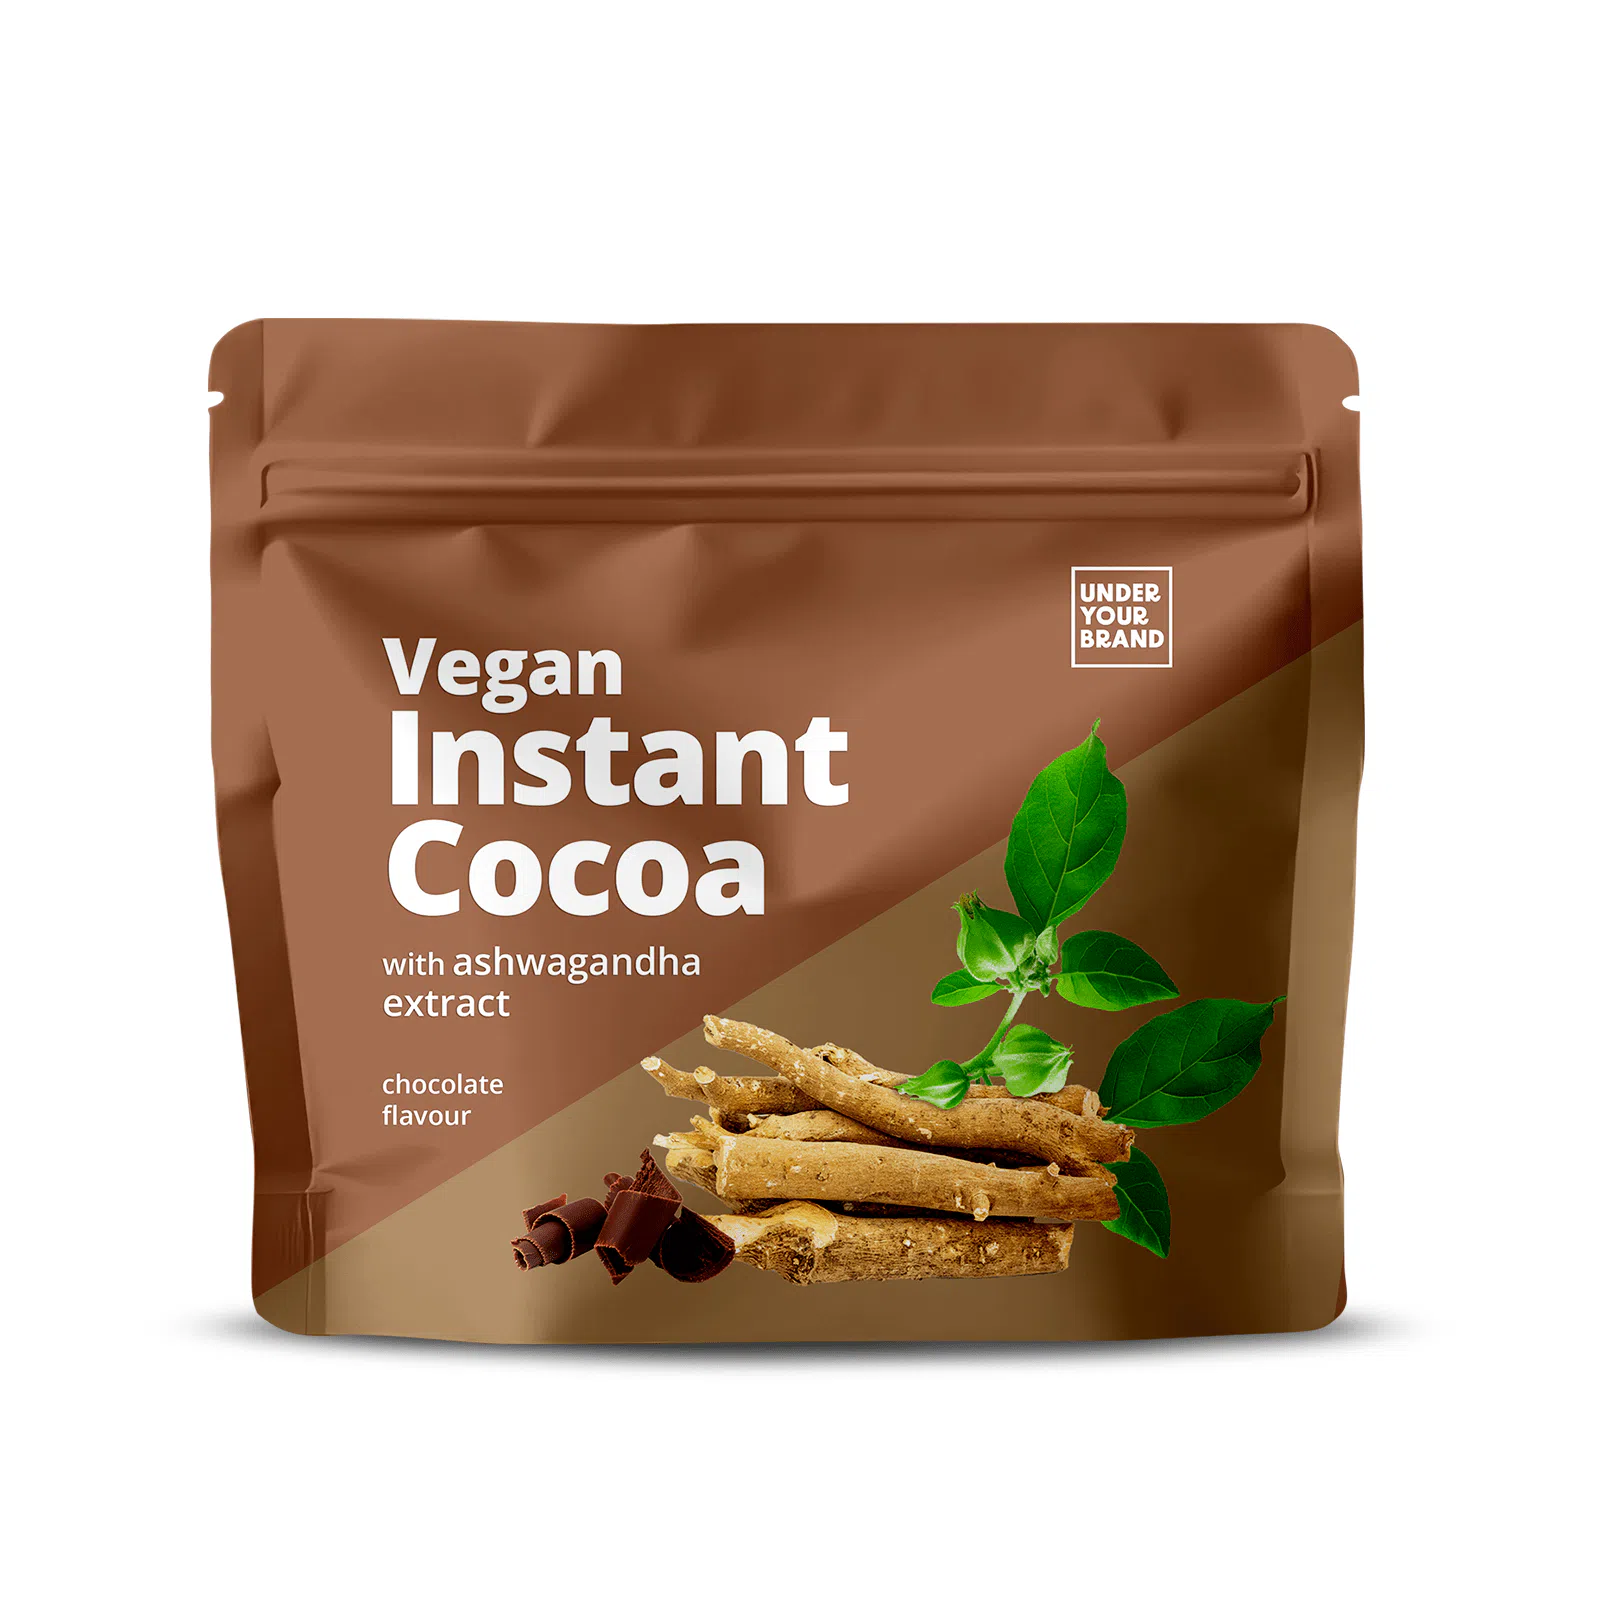 Private label white label AmerPharma vegan instant cocoa with ashwagandha extract chocolate flavour in fully printed doypack